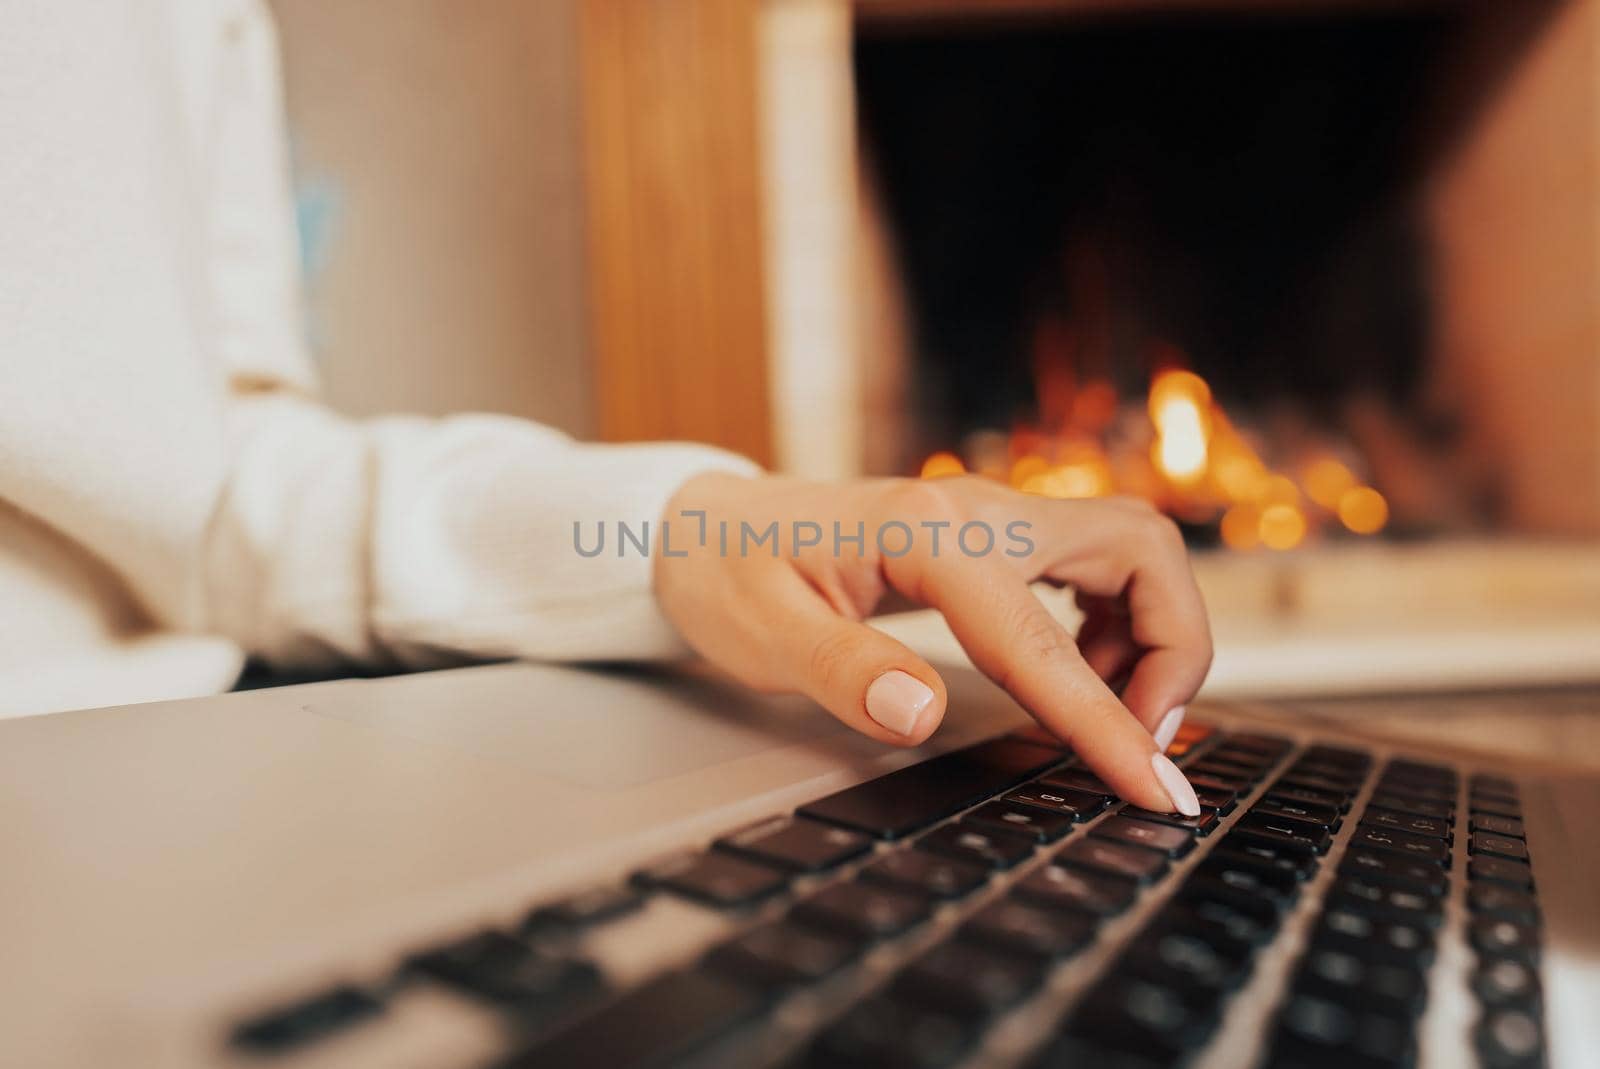 Young woman studying on laptop, sitting near cozy fireplace at home. Focus on hands typing on keyboard. Social distancing concept. Lady writing message to friends. High quality photo